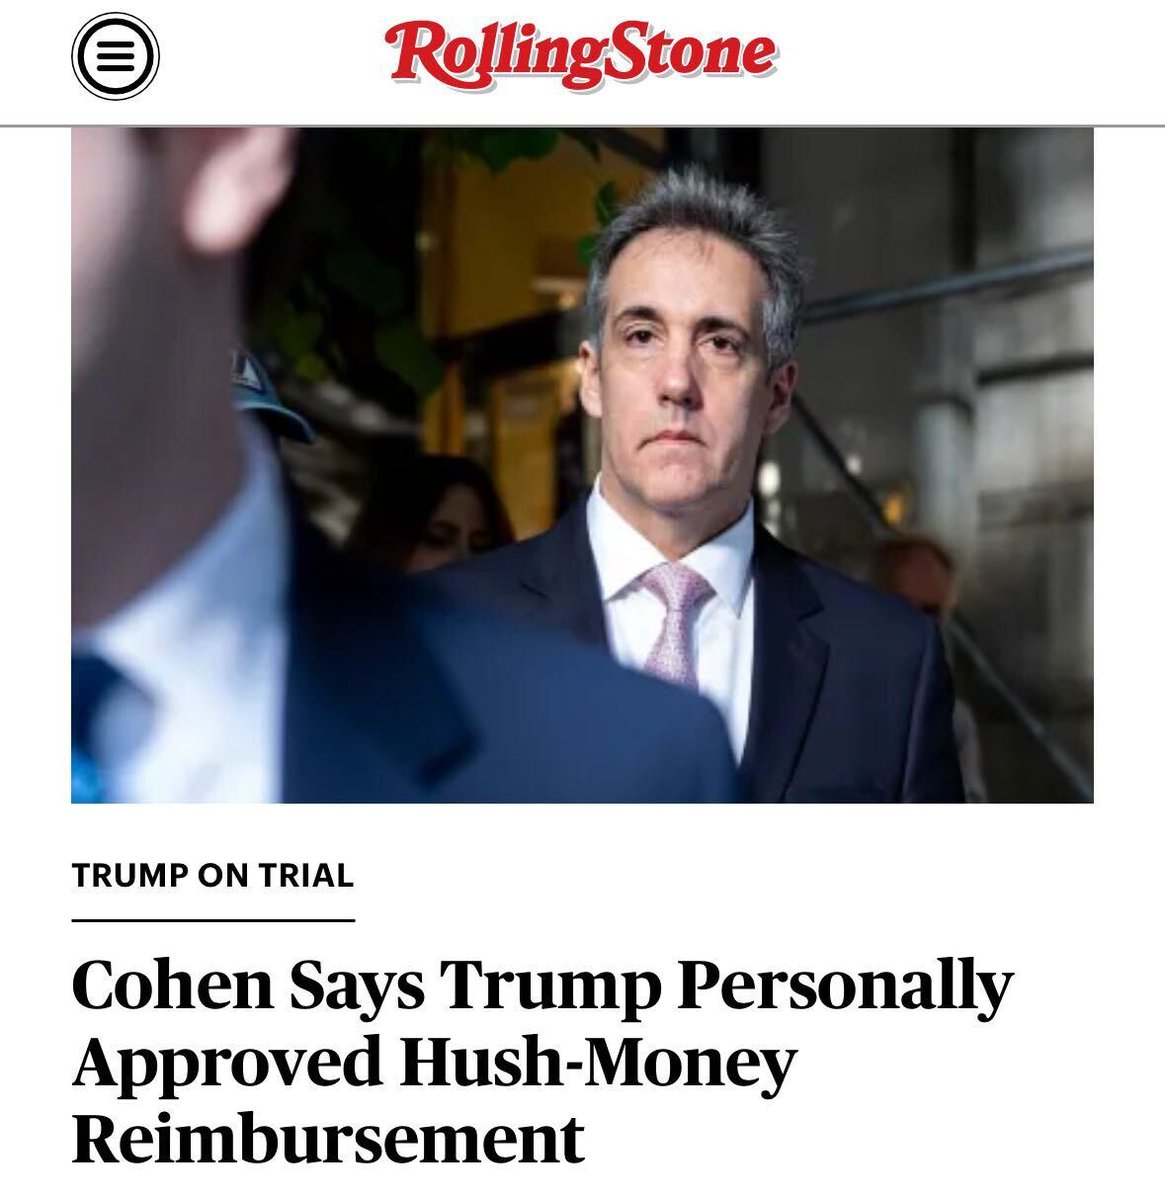 Michael Cohen testified that Trump signed off on the hush-money reimbursement plan at the center of his criminal trial. “He approved it and turned around and said it’s gonna be one heck of a ride in D.C.' More: rollingstone.com/politics/polit…